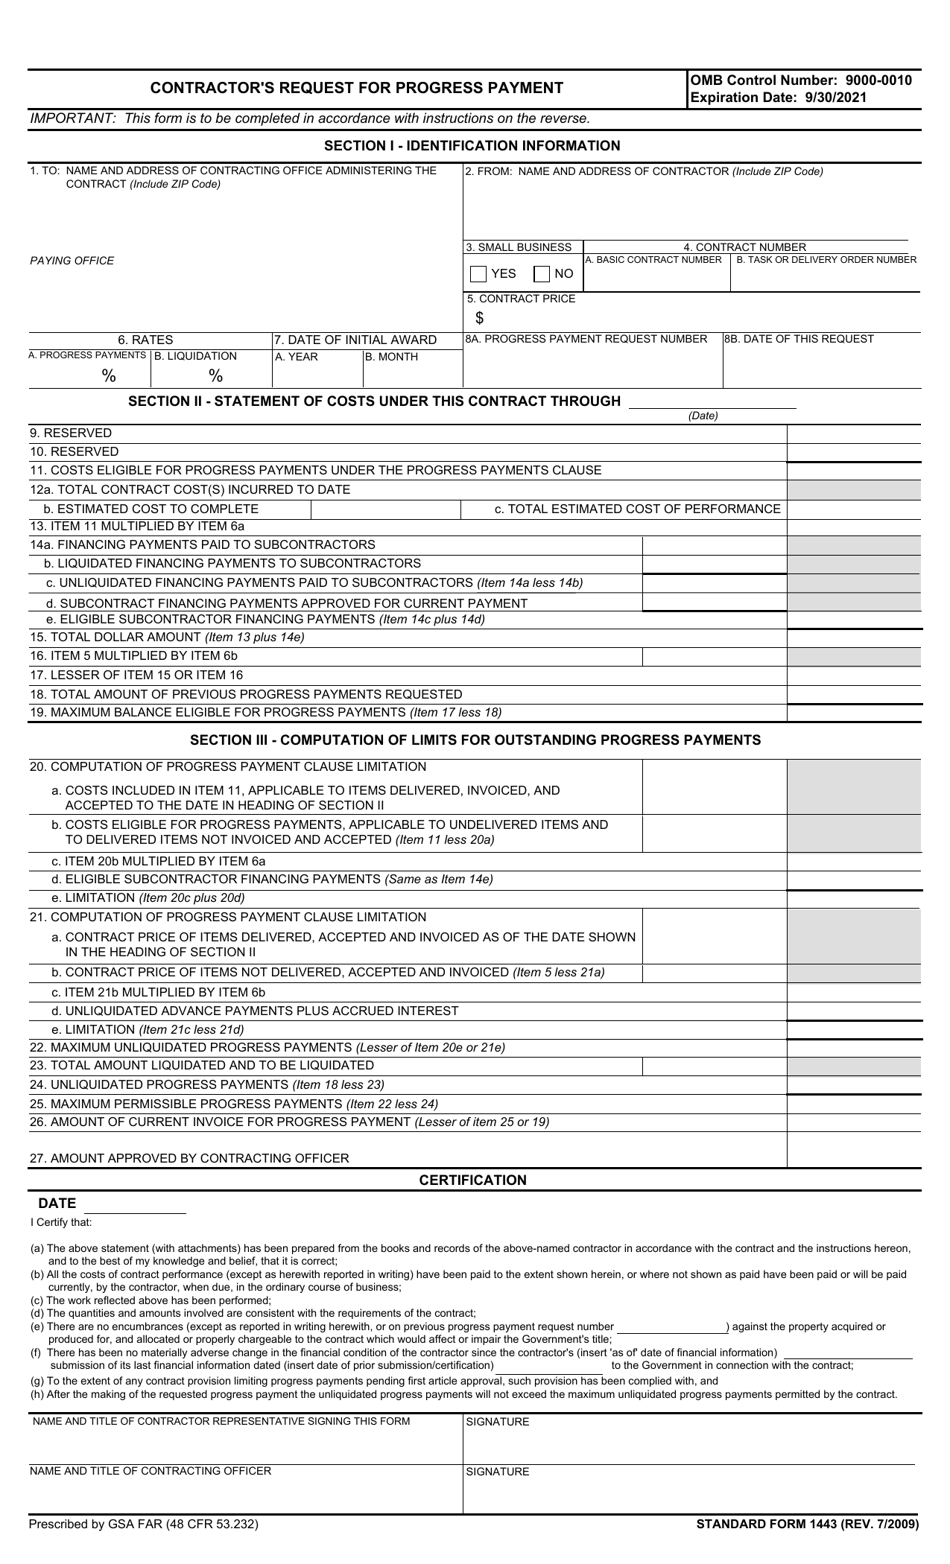 Form SF-1443 Contractor's Request for Progress Payment, Page 1